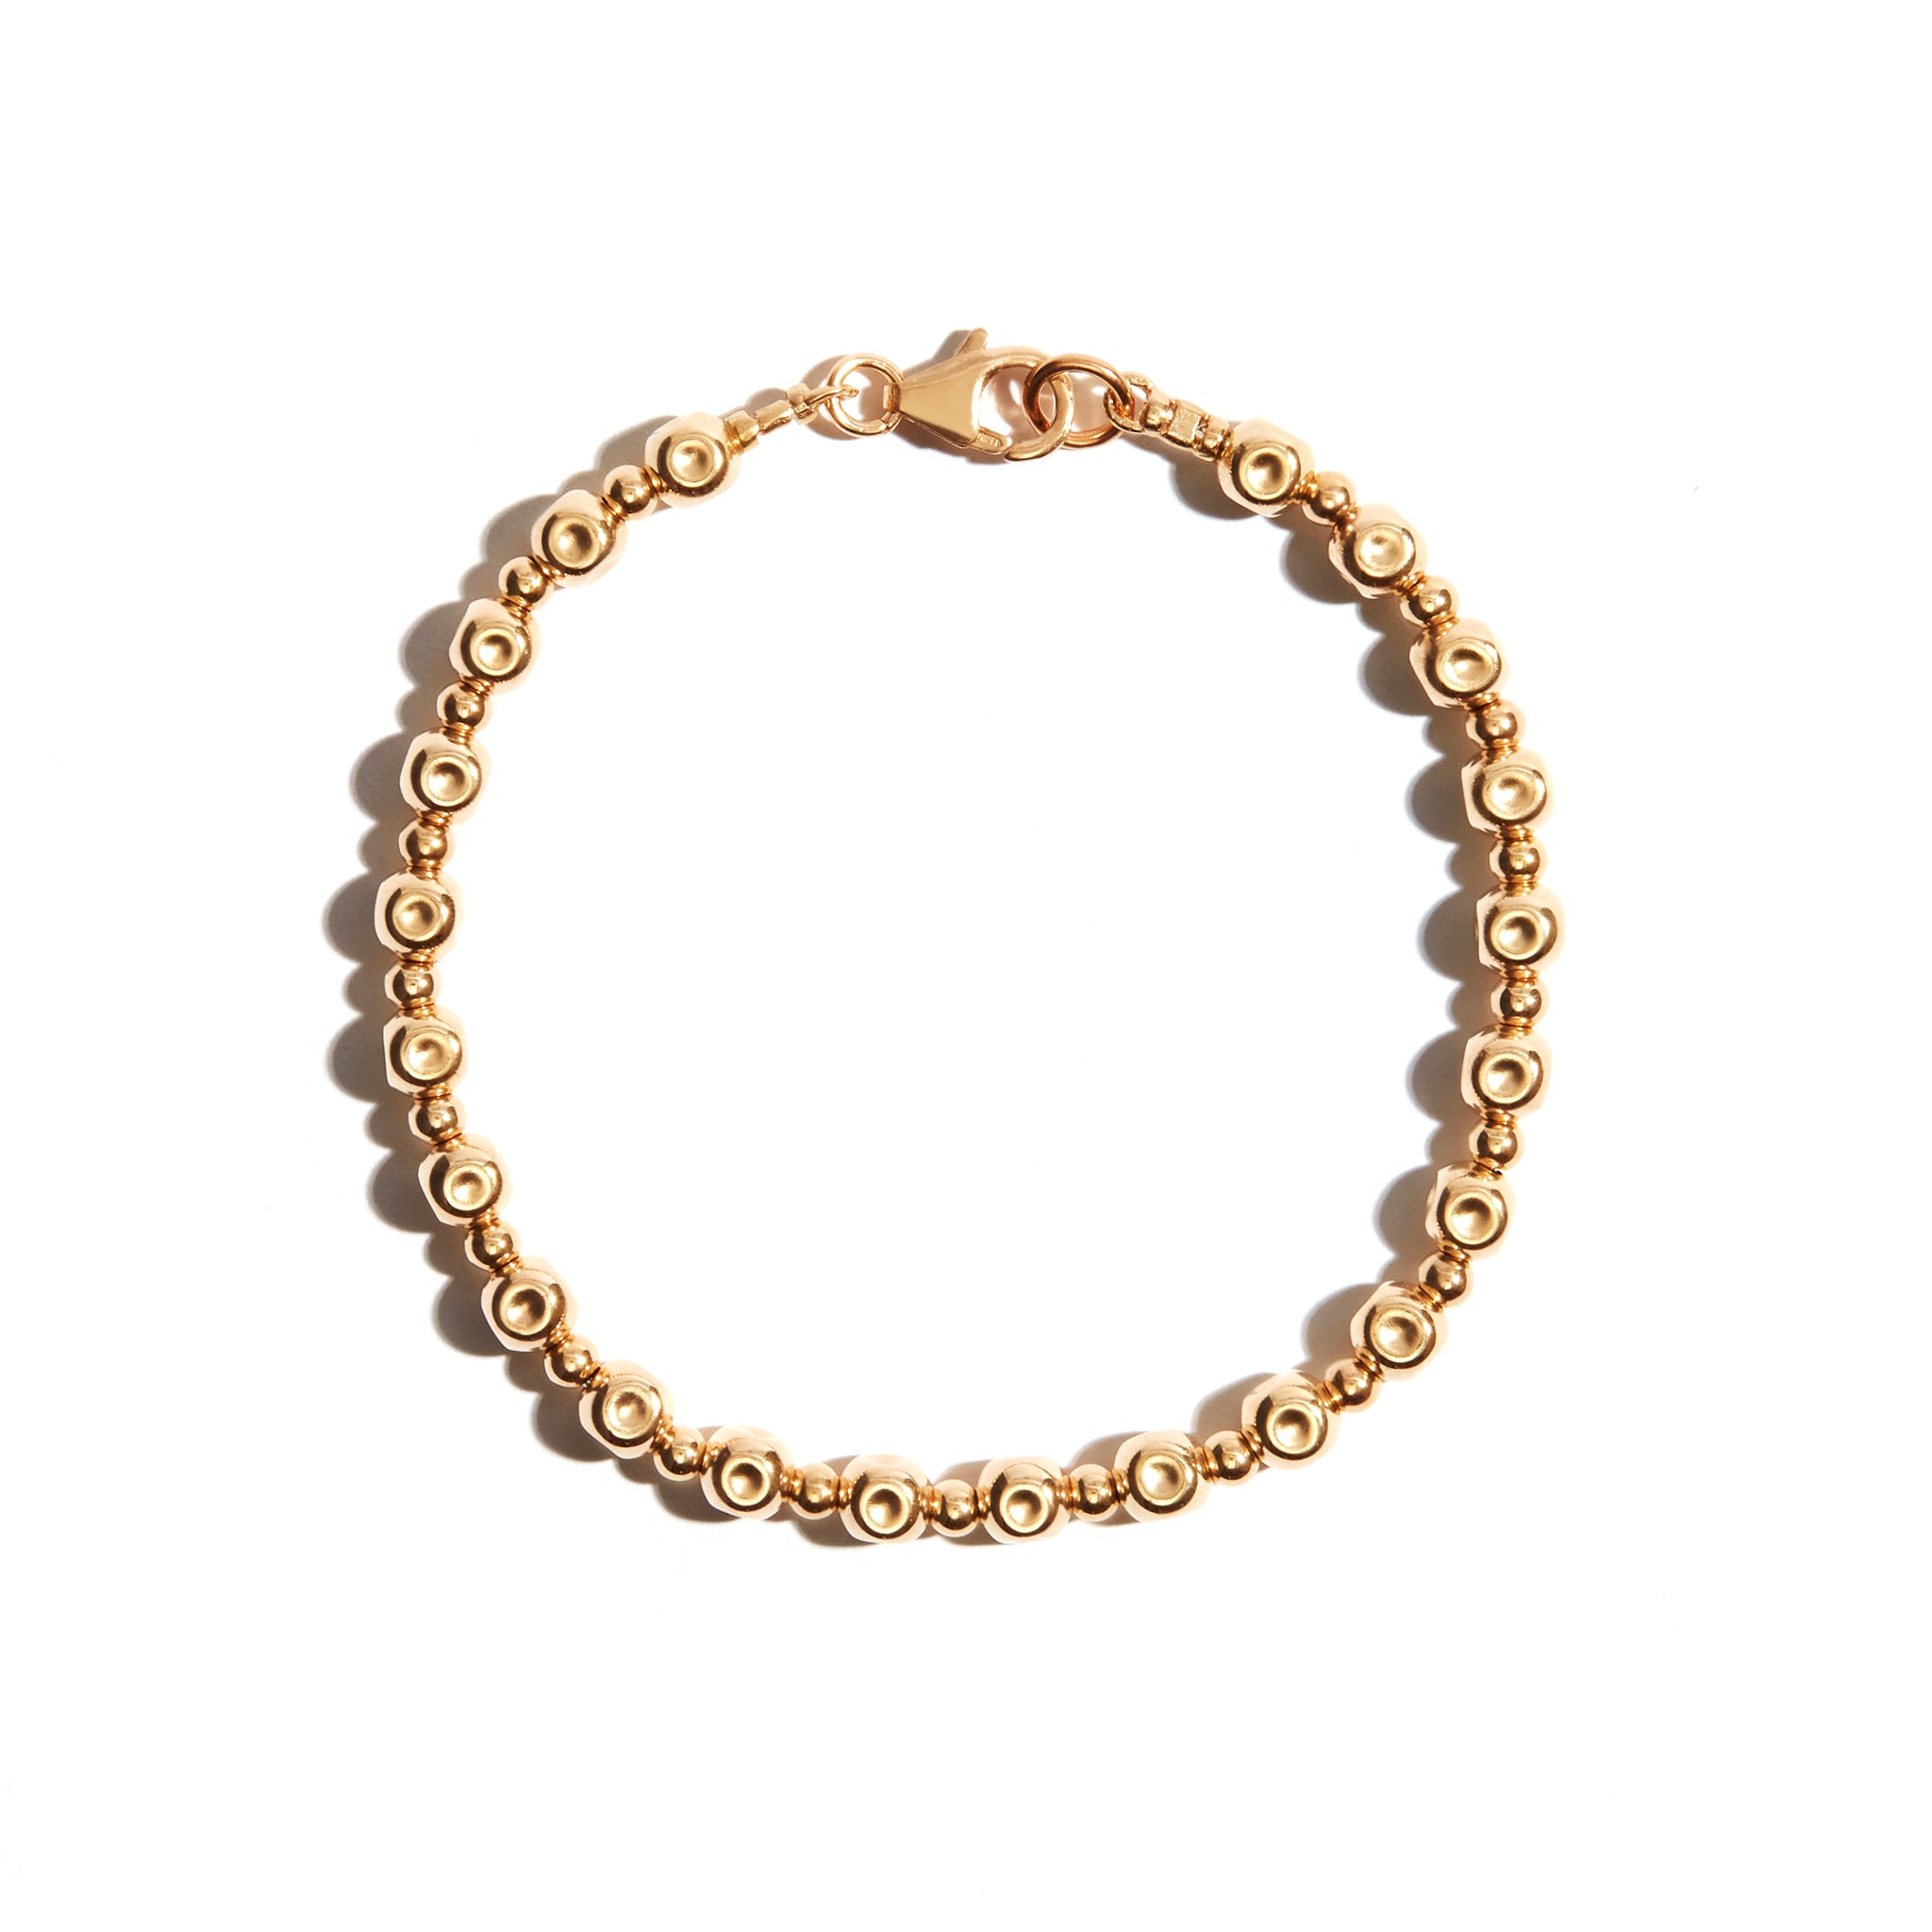 Our Beaten Beaded Bracelet is a classic style with beaten textured gold beads. Perfect when worn alone, but is also a perfect piece to add to layer up bracelets.